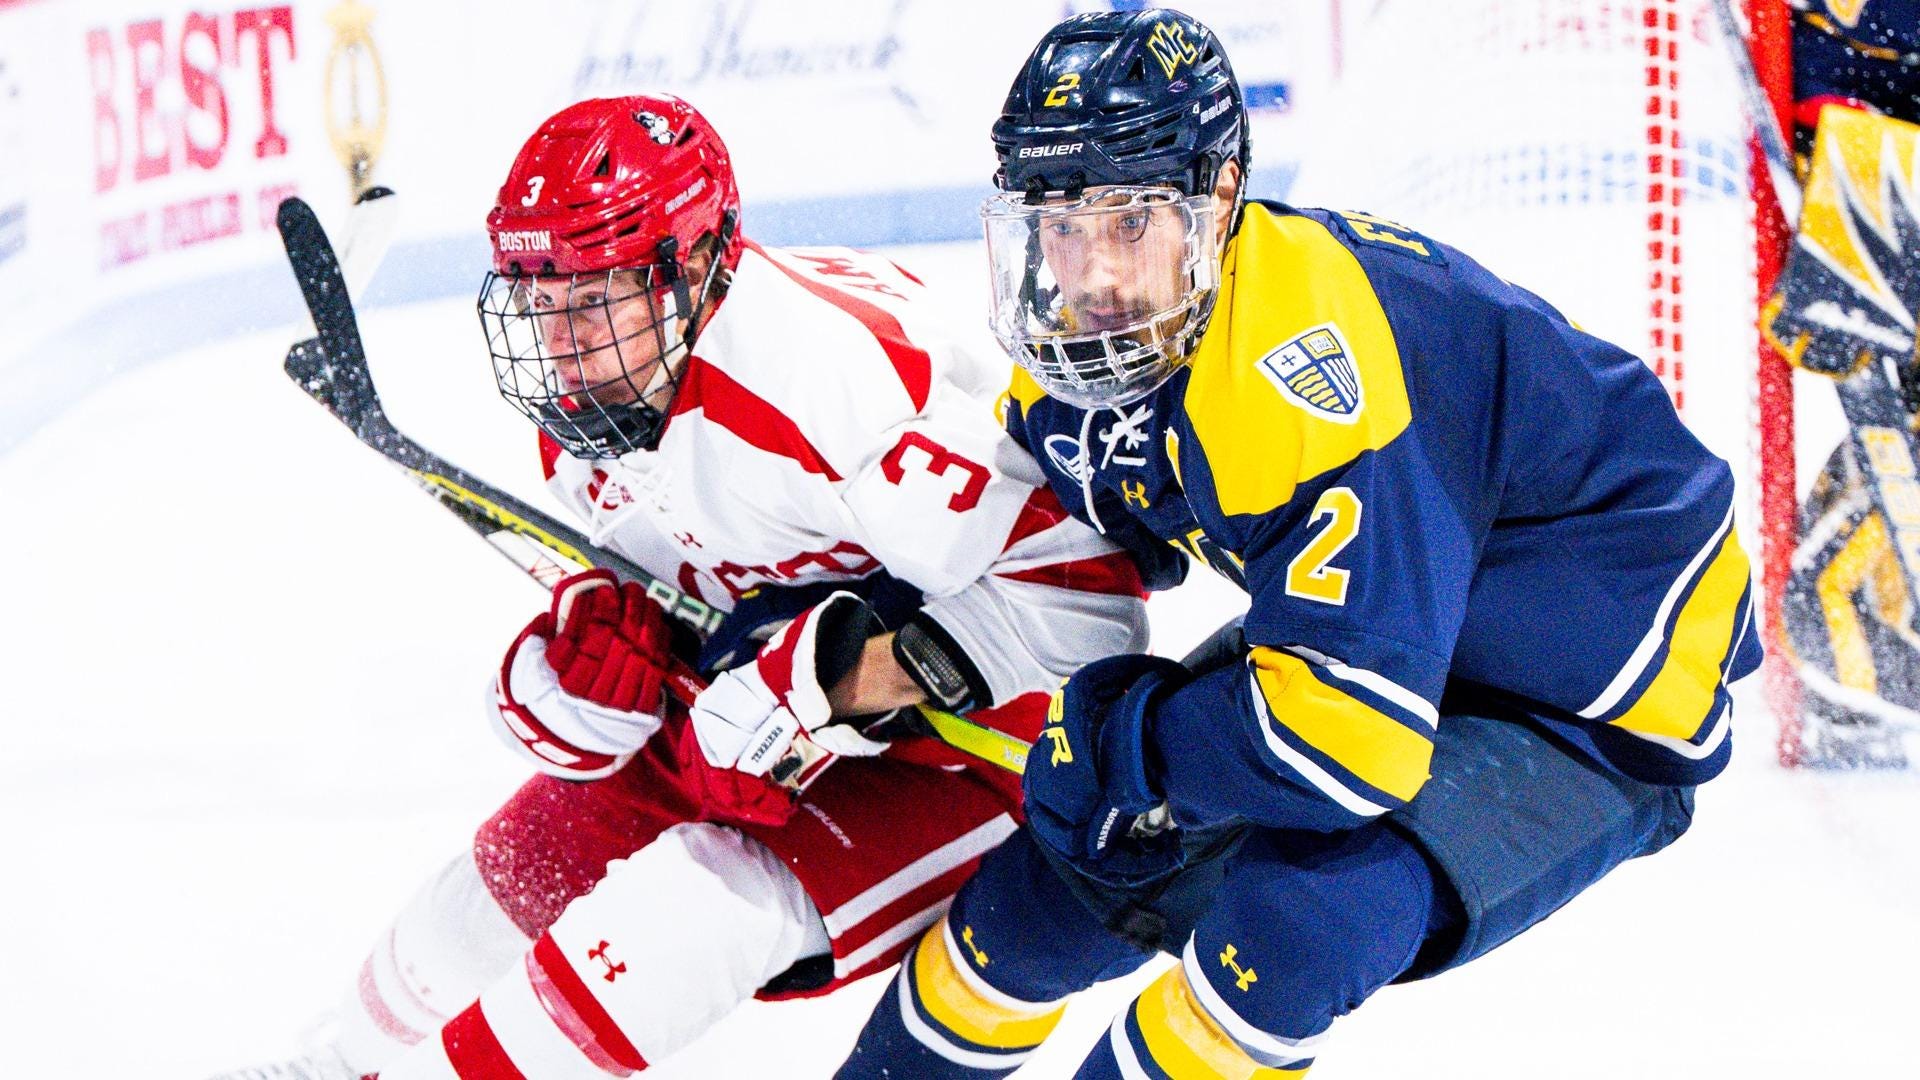 Merrimack's losing streak reaches seven games after Friday's 7-1 loss at BU